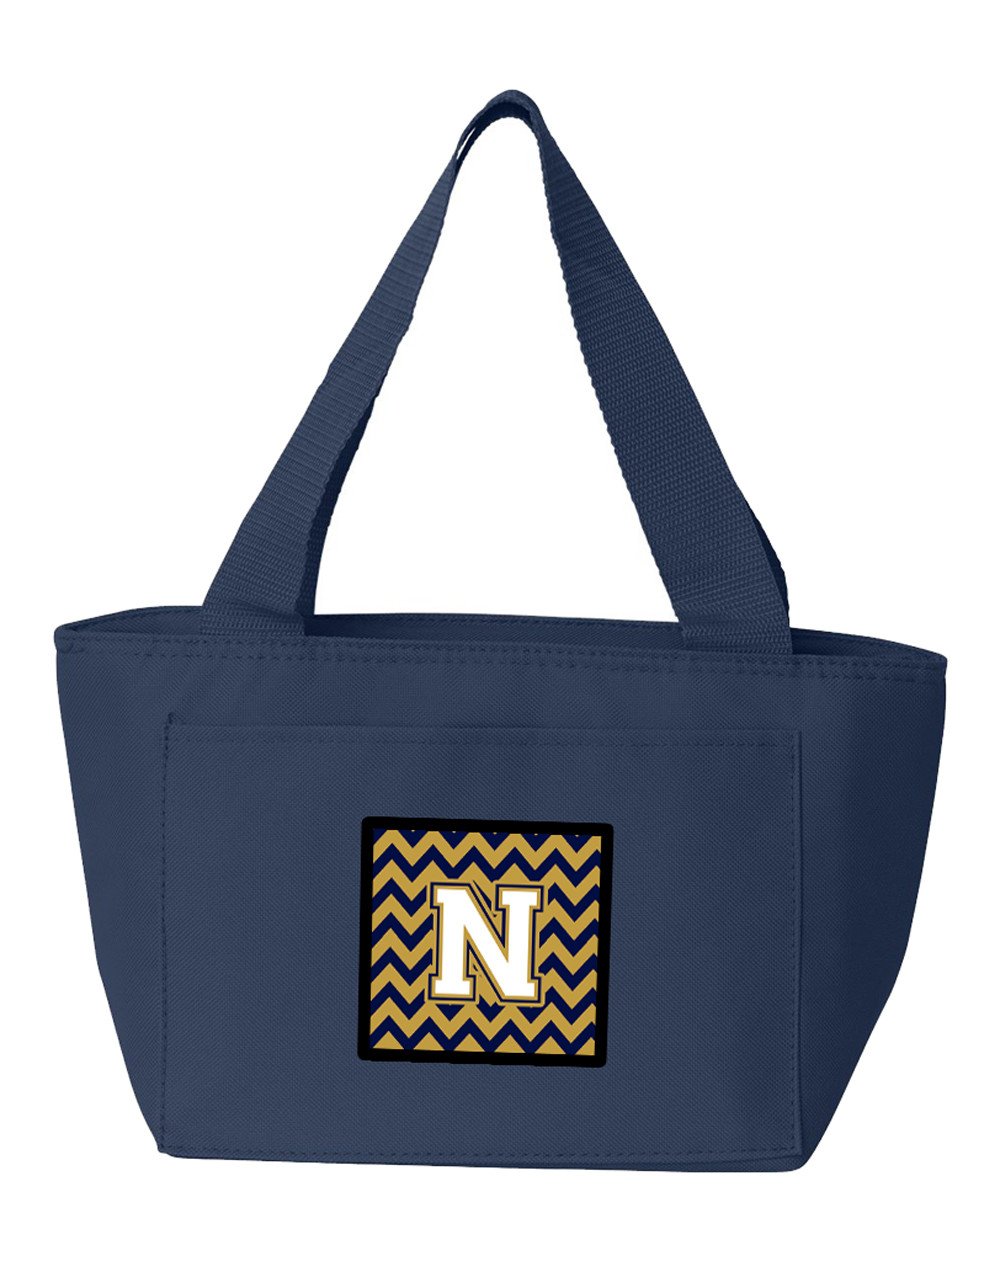 Letter N Chevron Navy Blue and Gold Lunch Bag CJ1057-NNA-8808 by Caroline's Treasures